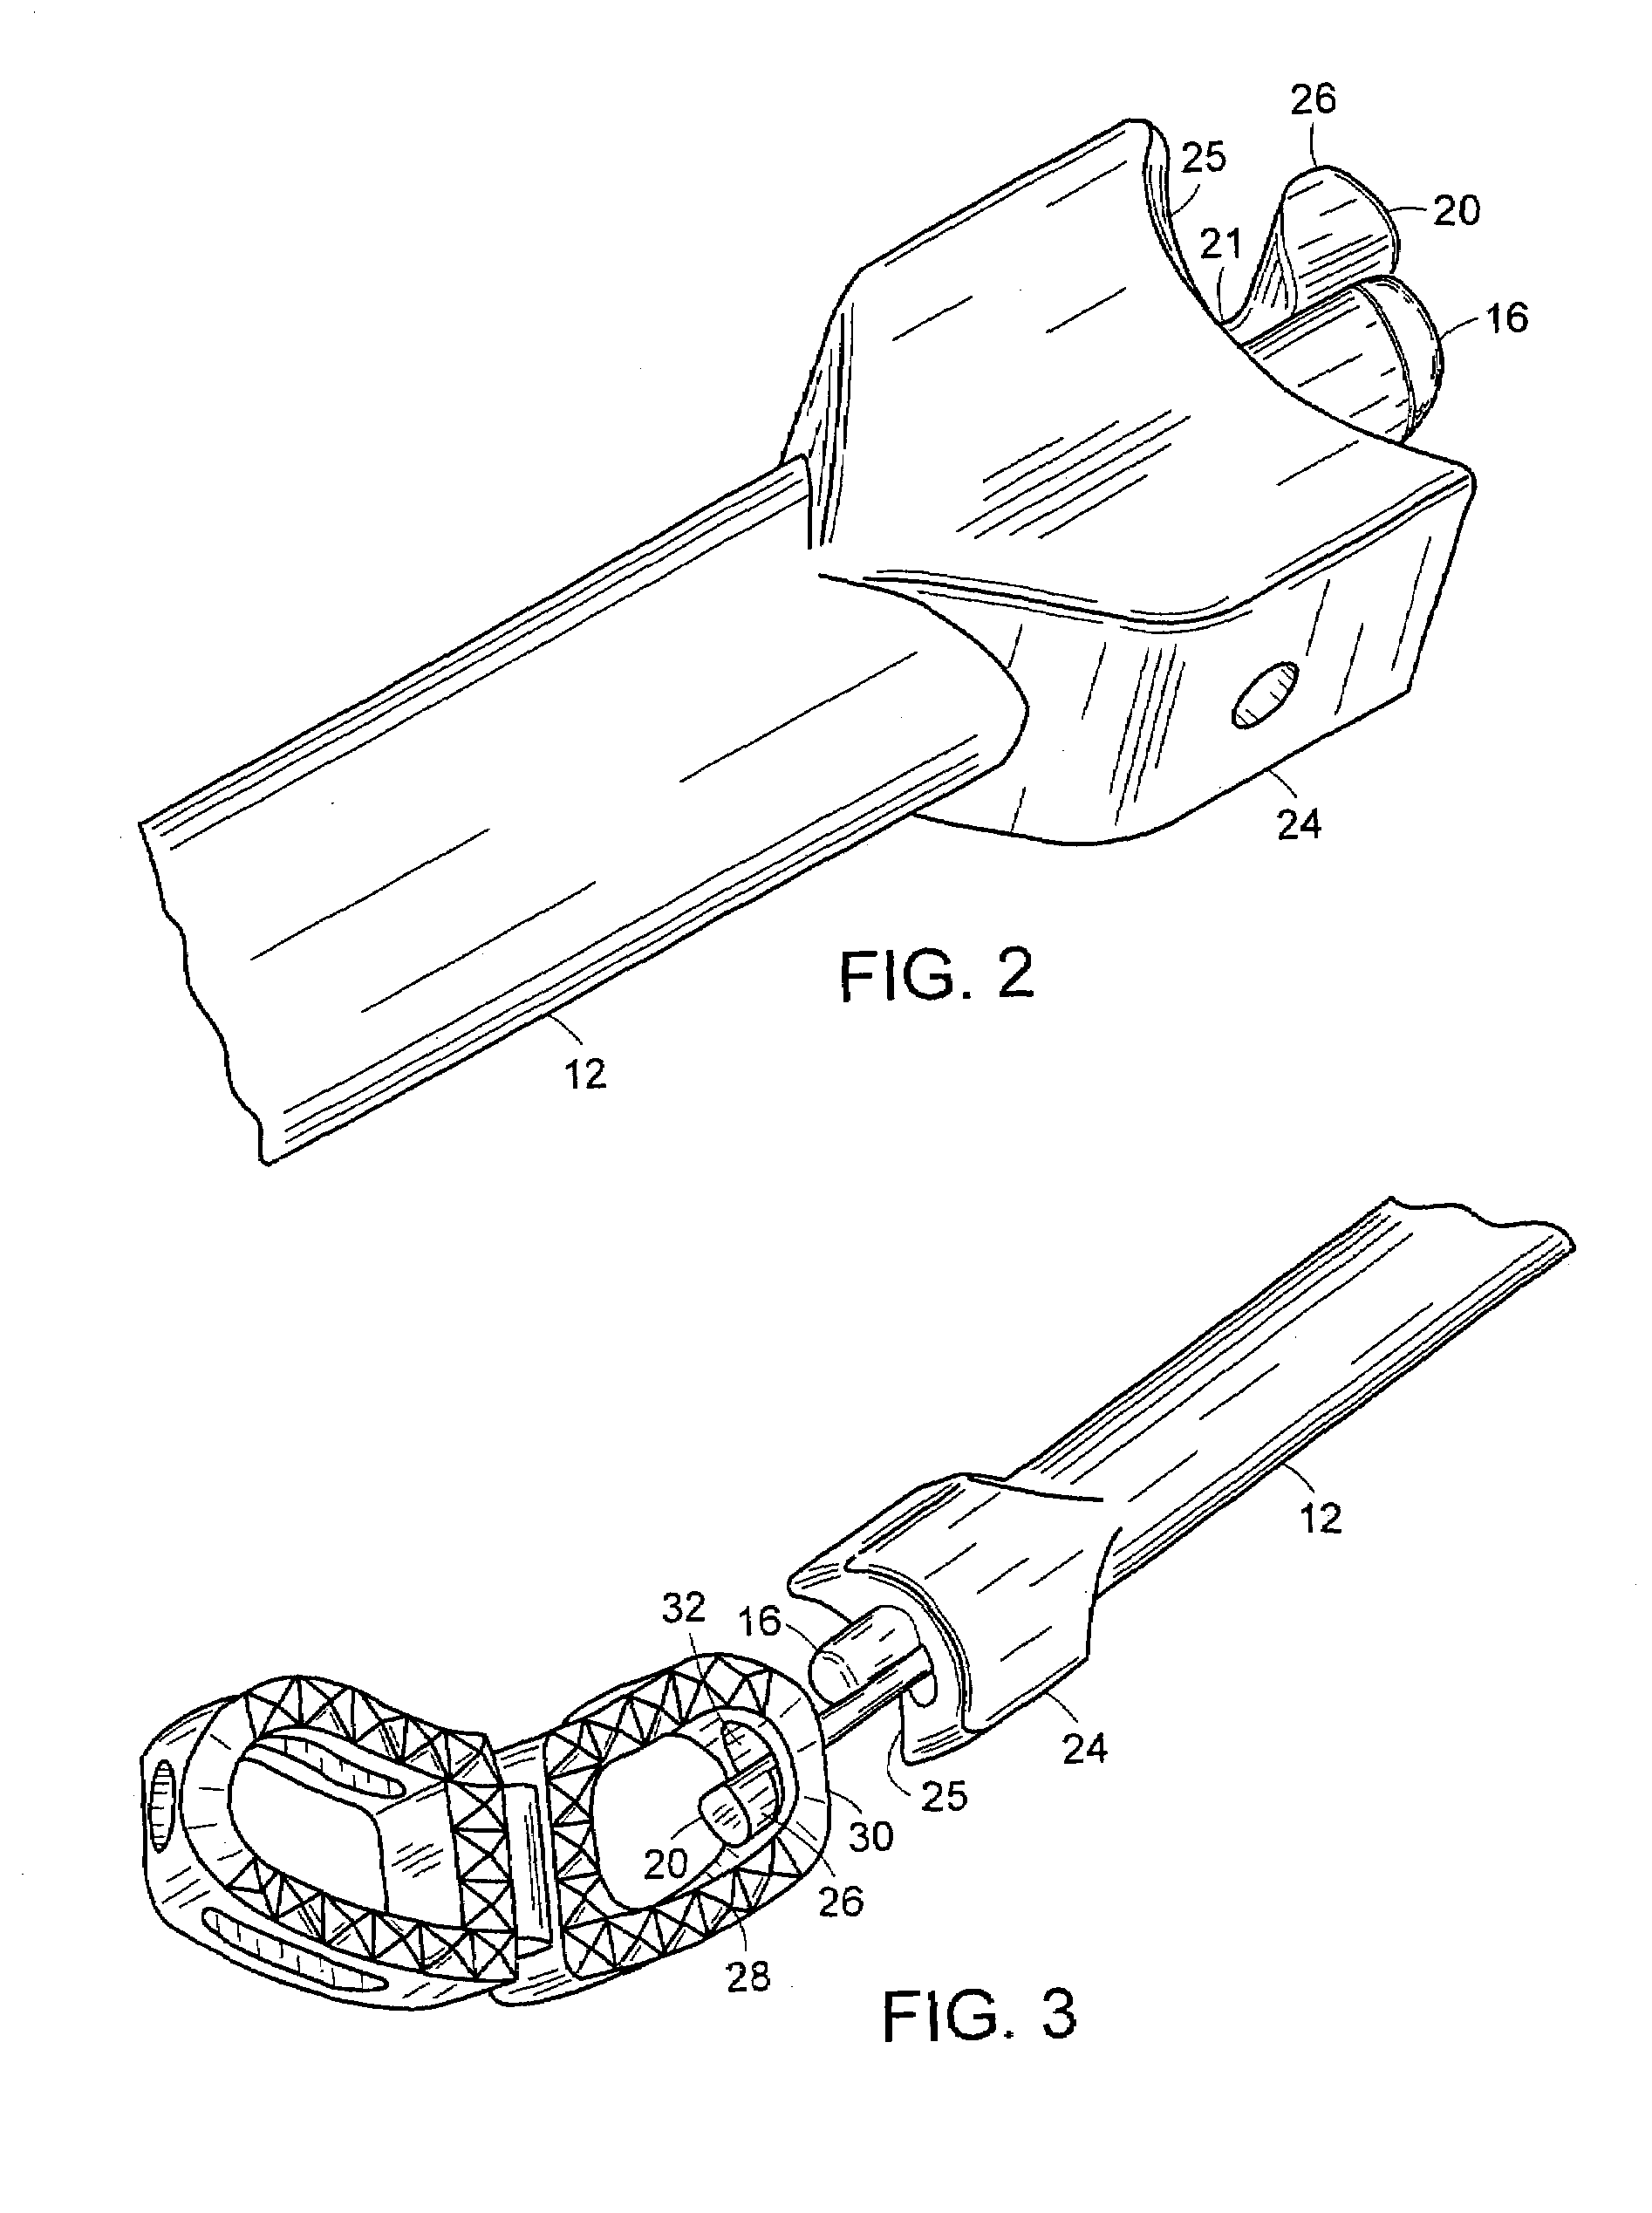 Device for insertion of implants